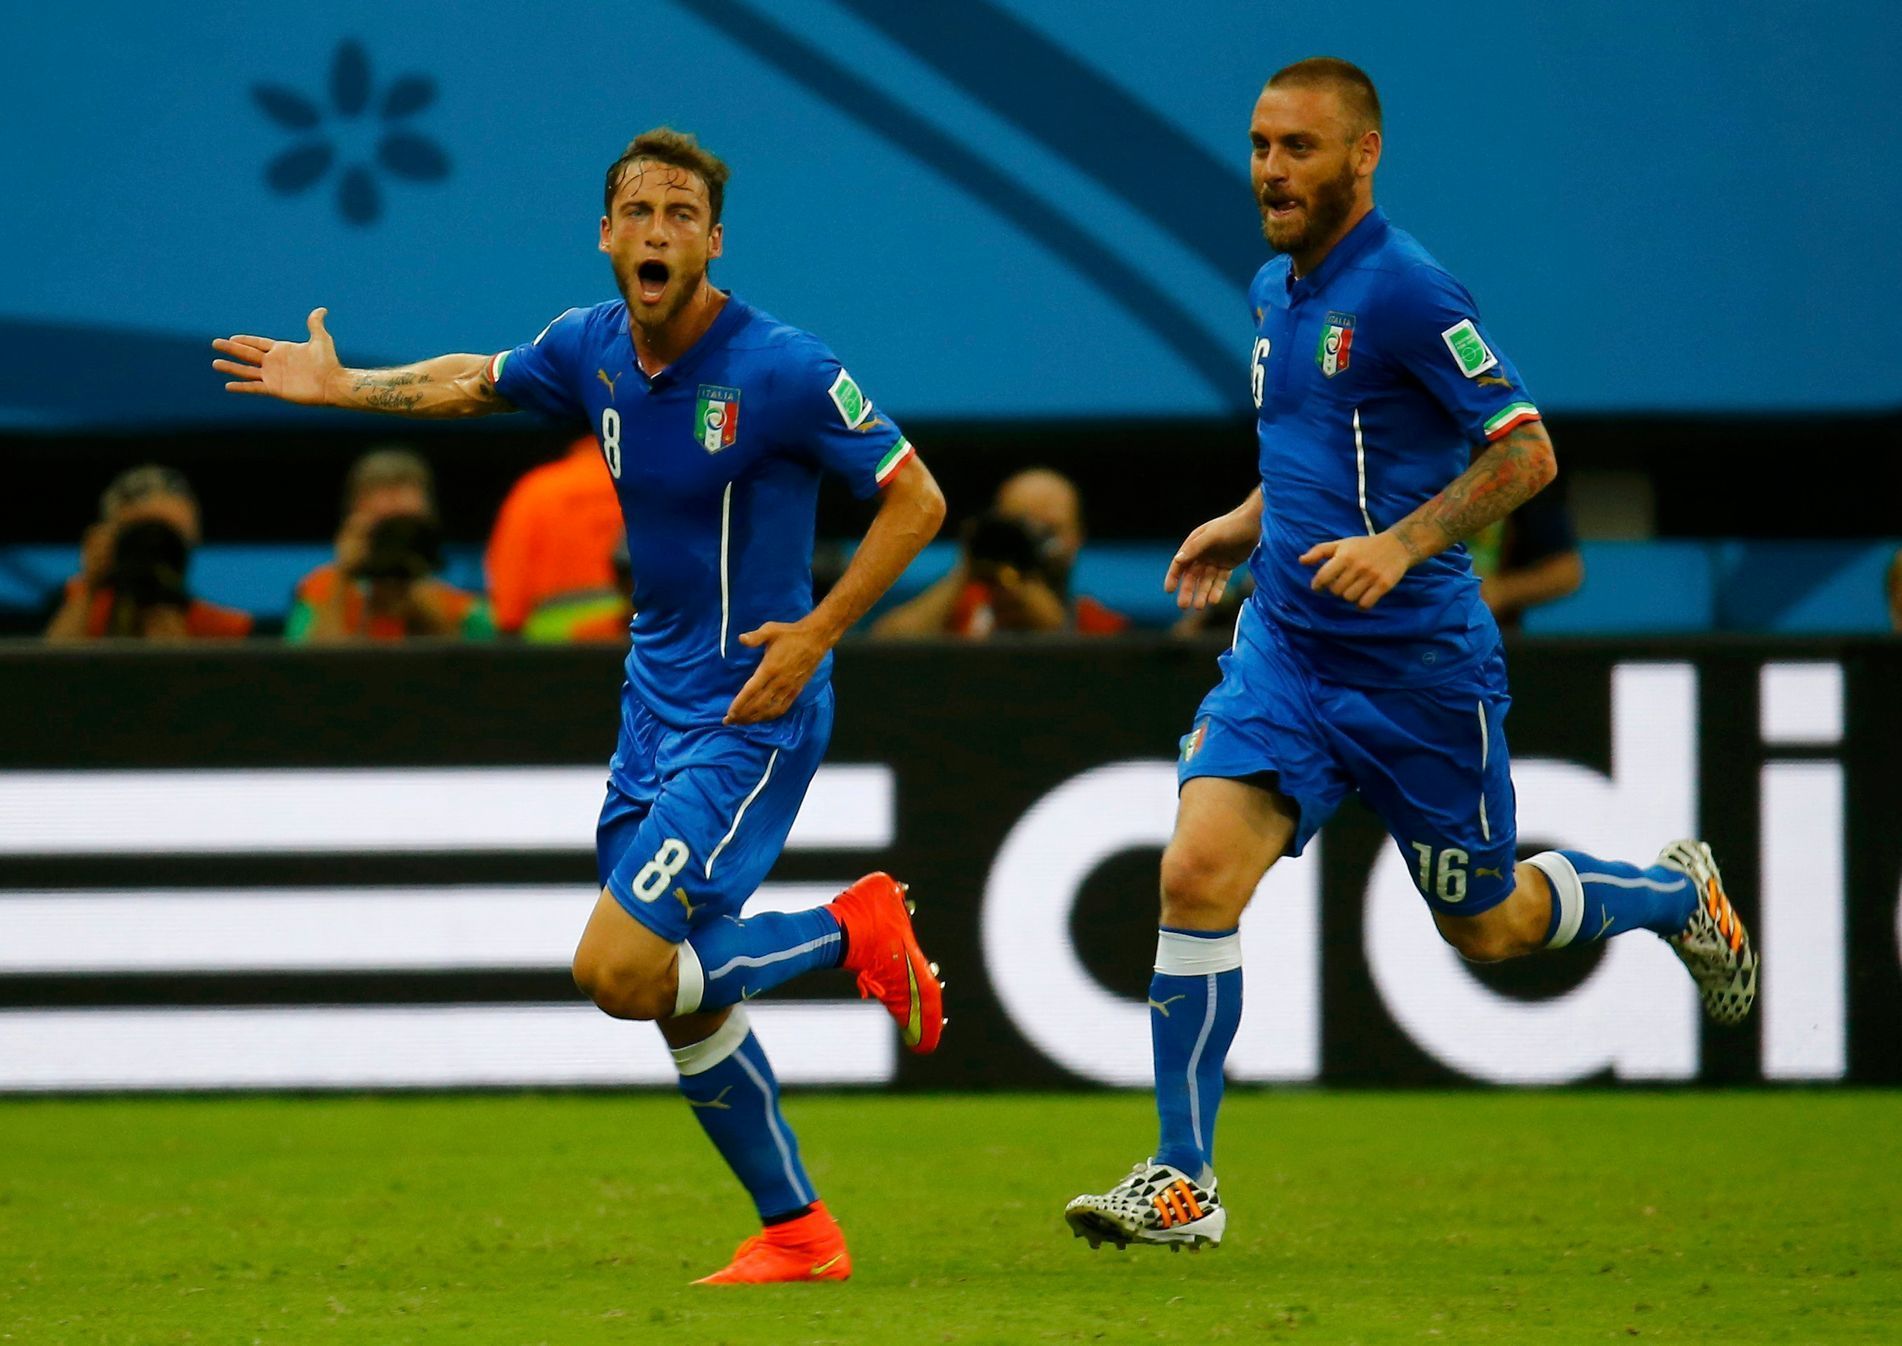 Italy's Marchisio and Itlay's De Rossi celebrate Marchisio's goal against England during their 2014 World Cup Group D soccer match at the Amazonia arena in Manaus